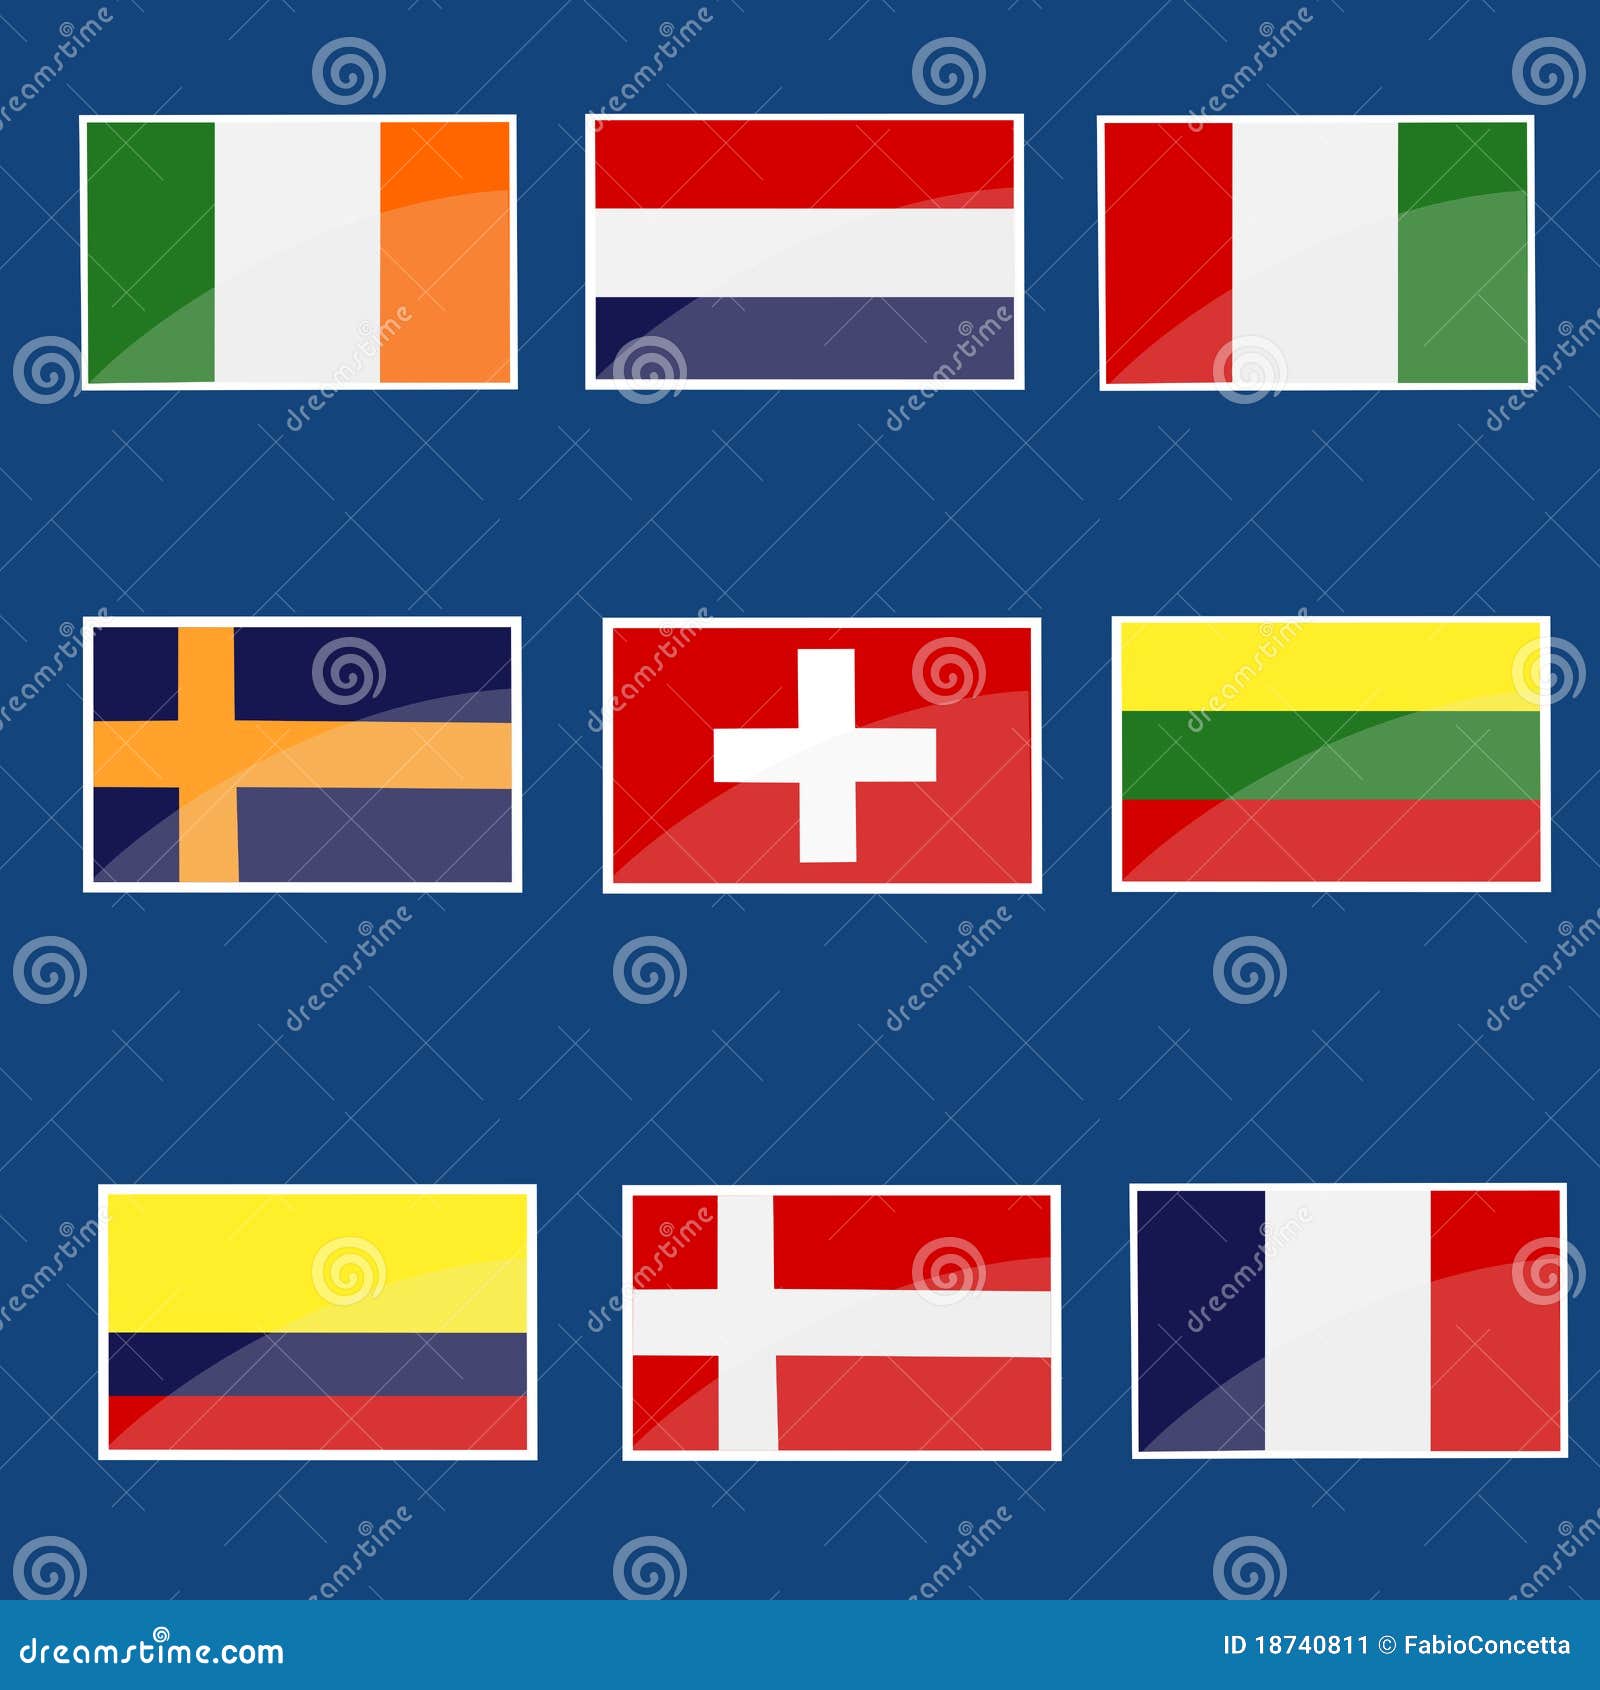 Collection of flags. This picture describes a collection of international flags.